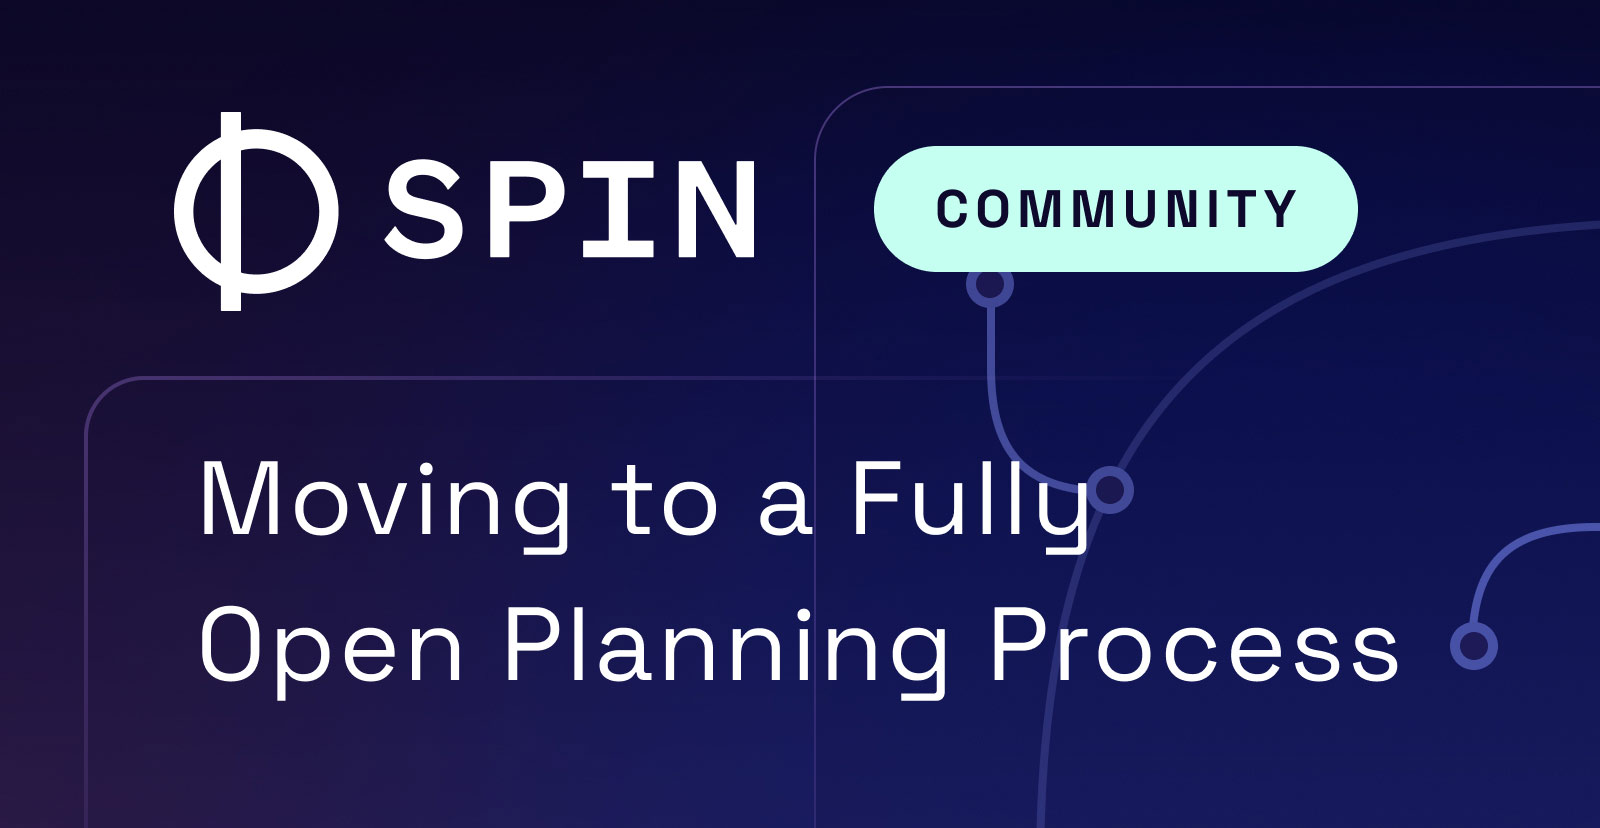 Moving to a Fully Open Planning Process for the Spin Project